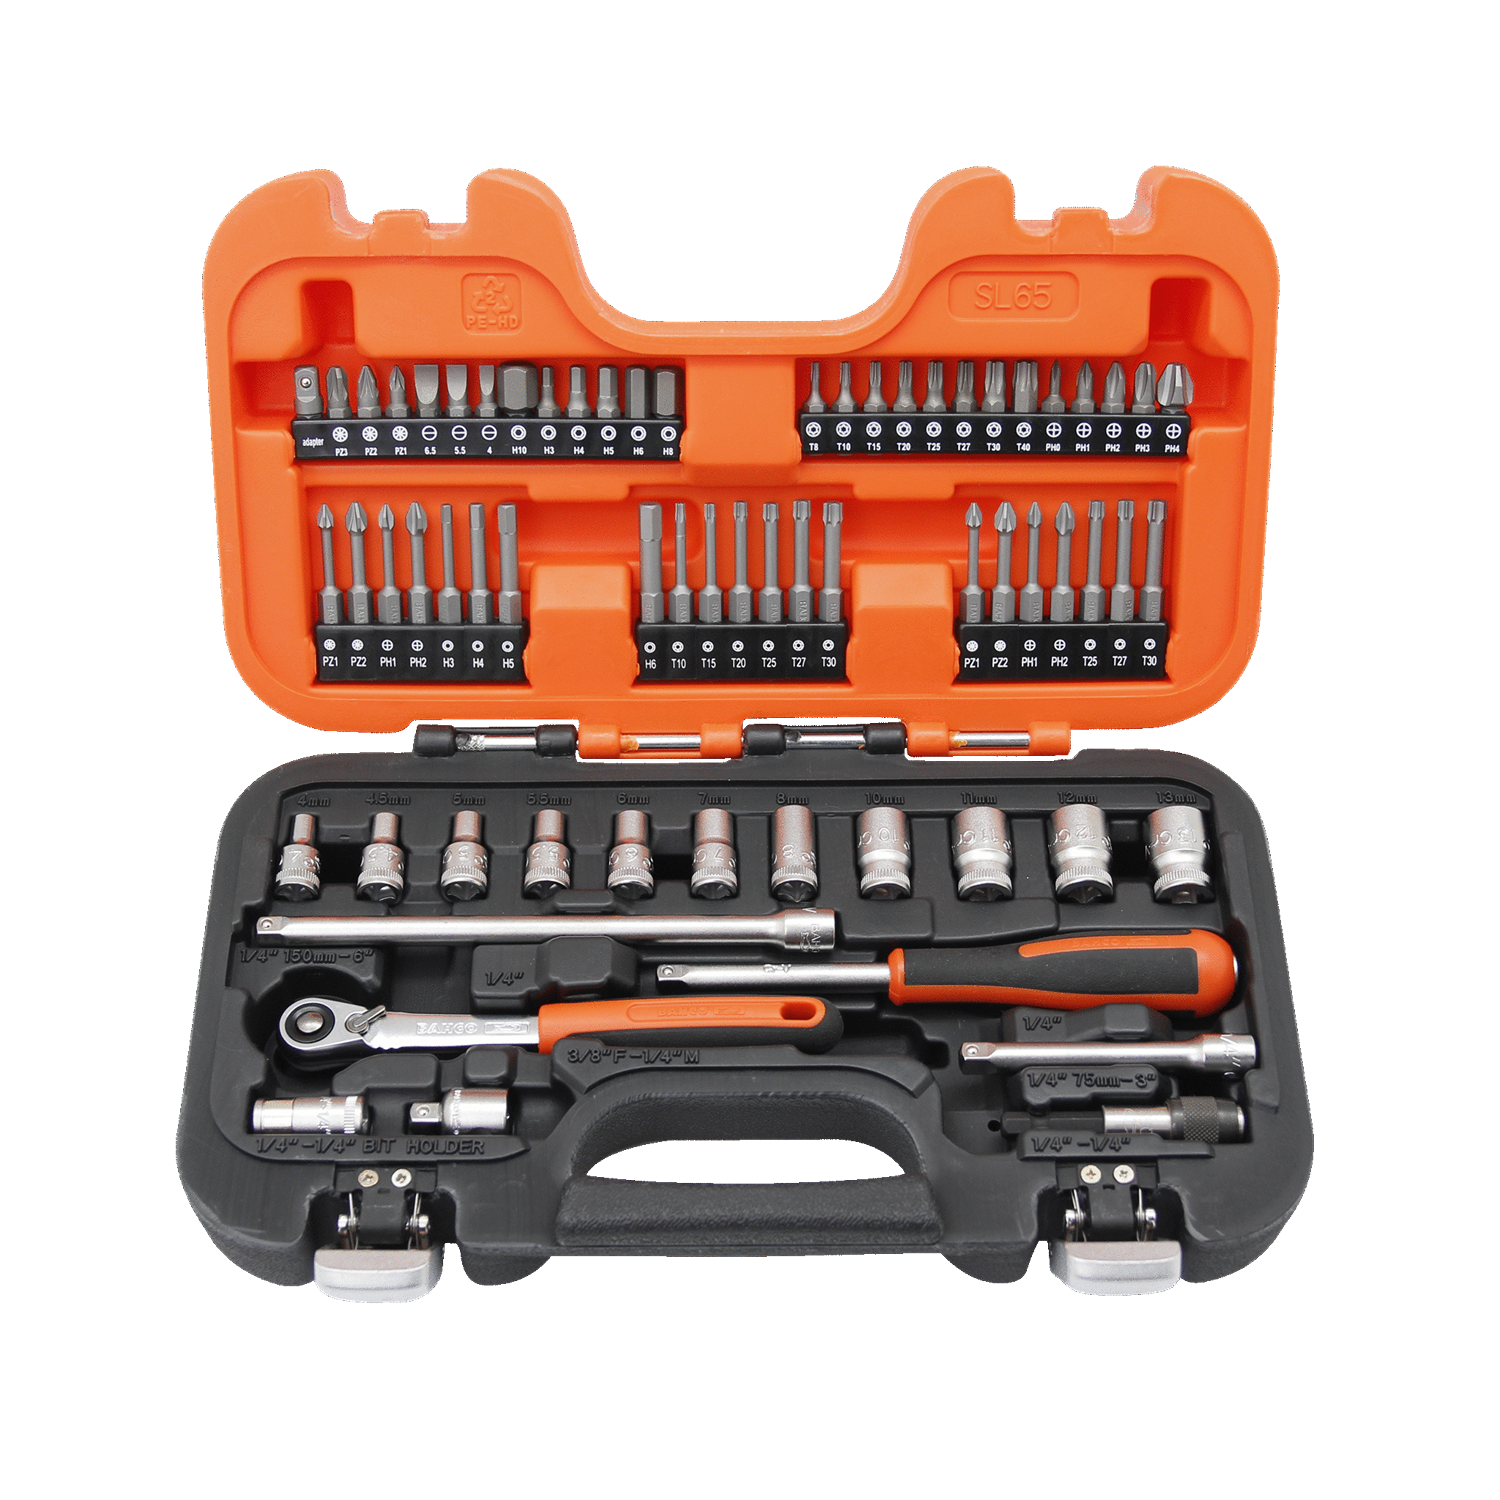 BAHCO SL65 1/4” Square Drive Socket Set Metric Hex Ratchet - Premium Socket Set from BAHCO - Shop now at Yew Aik.